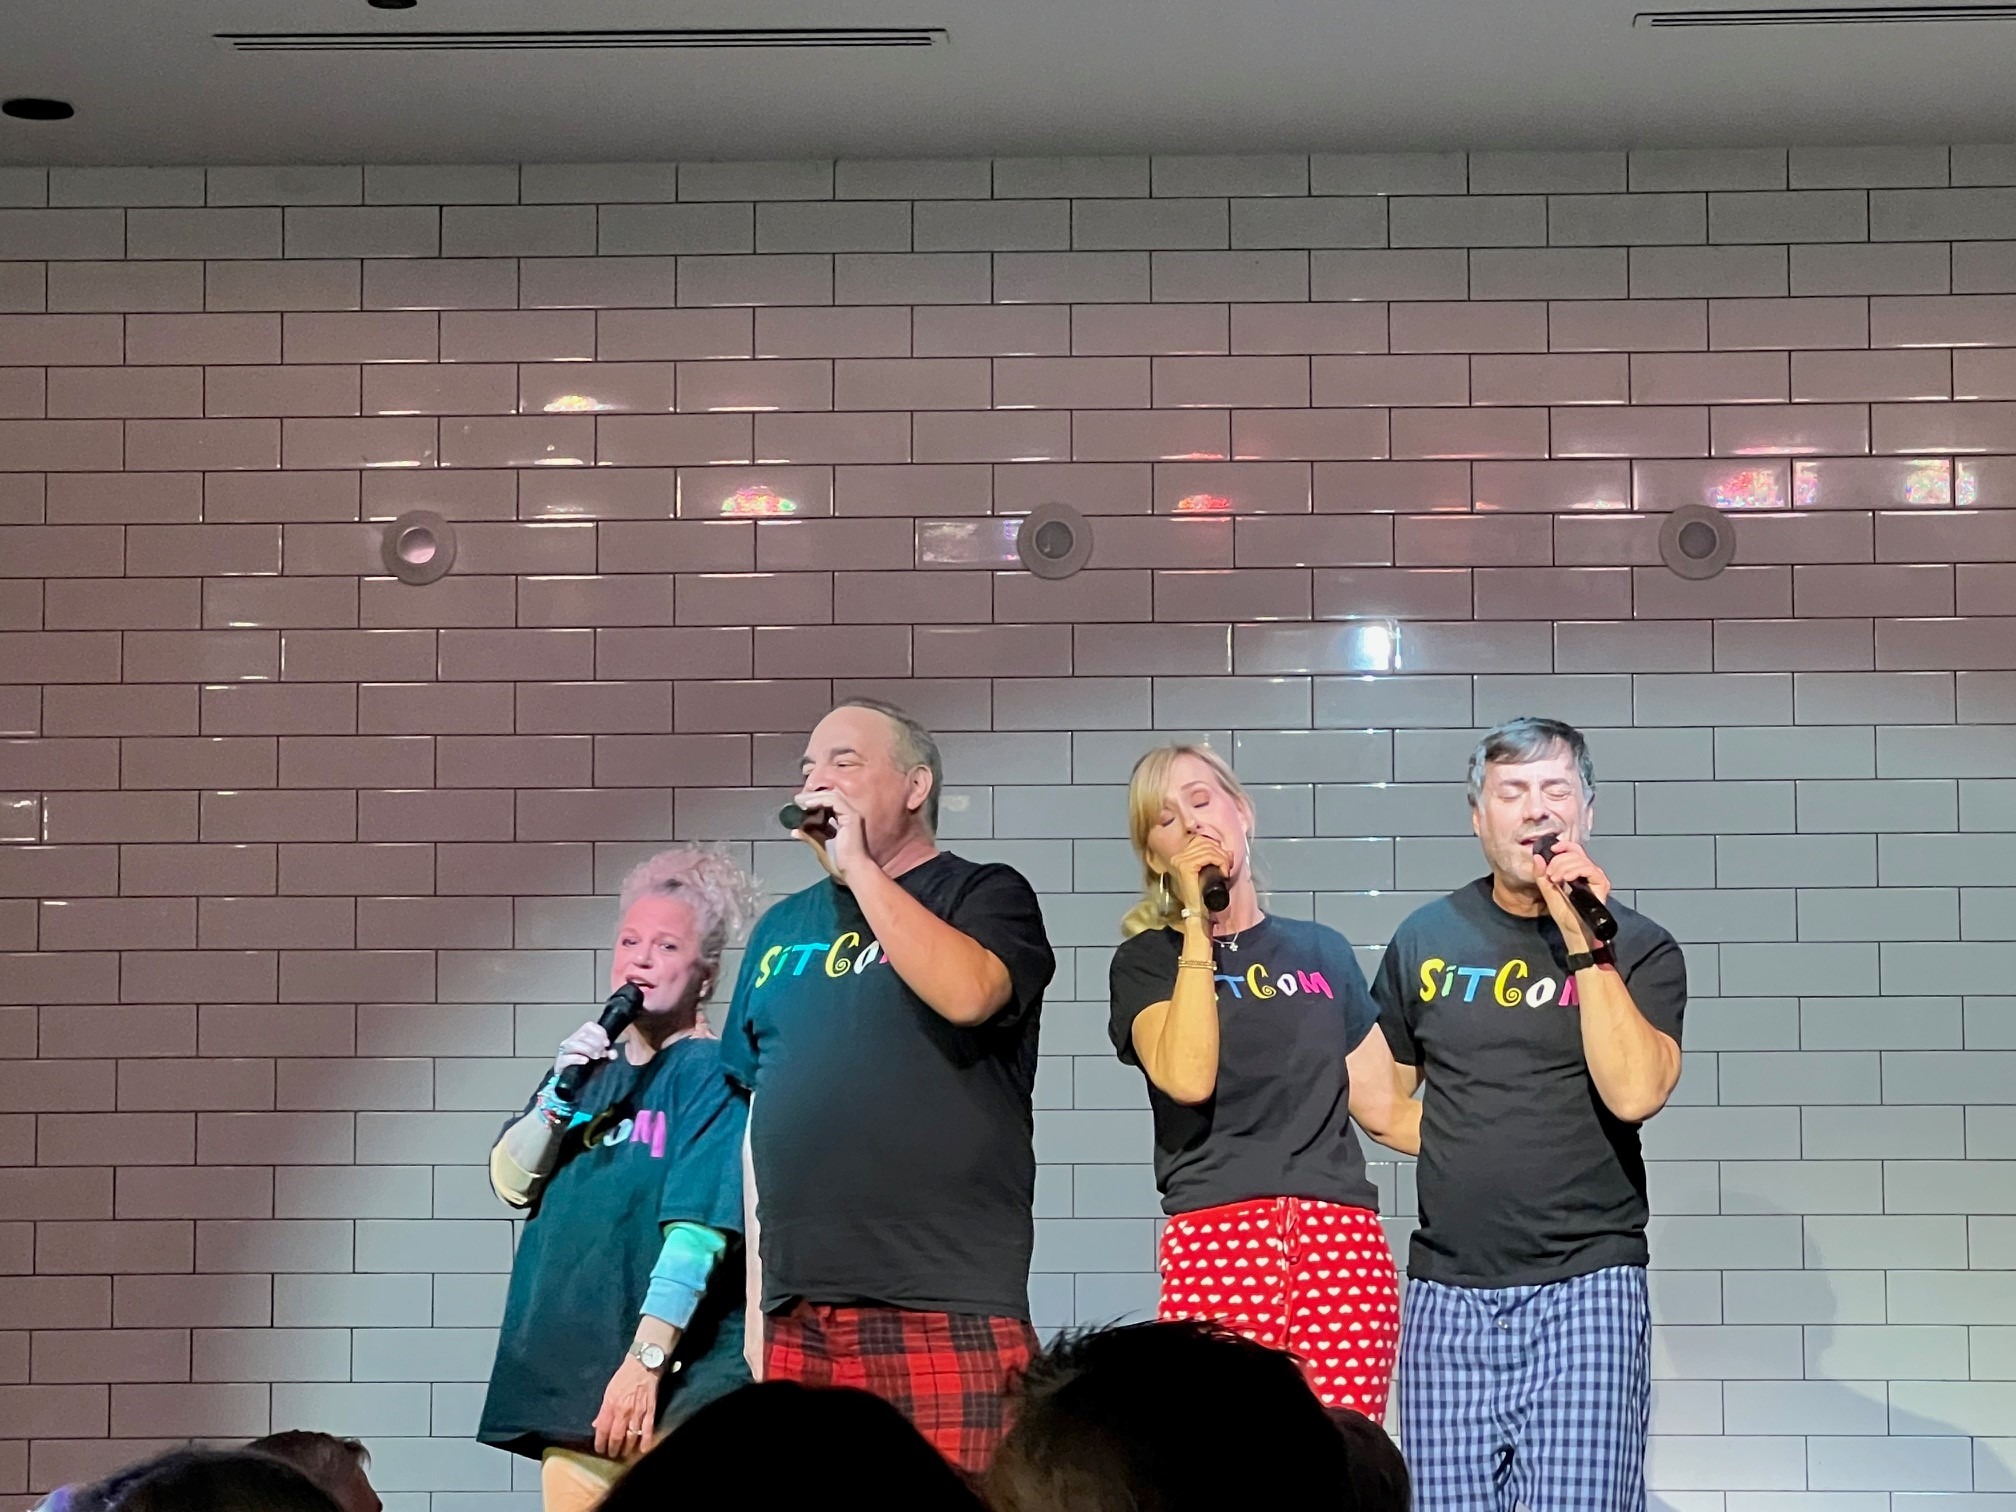 two men and two women singing on a stage, wearing black shirts that read "sitcom"